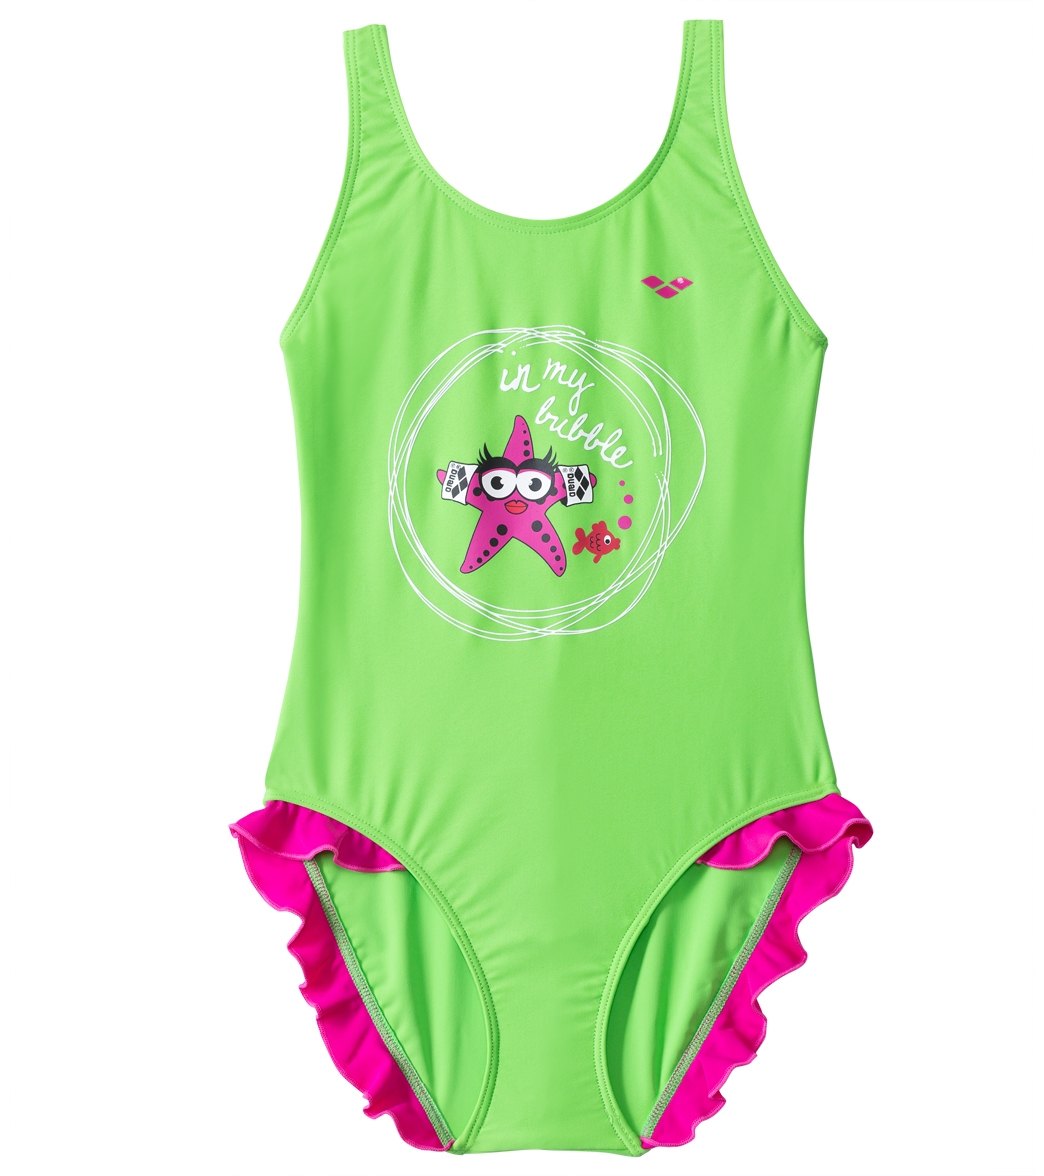 Arena Water Tribe Girls One Piece Swimsuit - Energy Green 2T Elastane/Polyamide - Swimoutlet.com